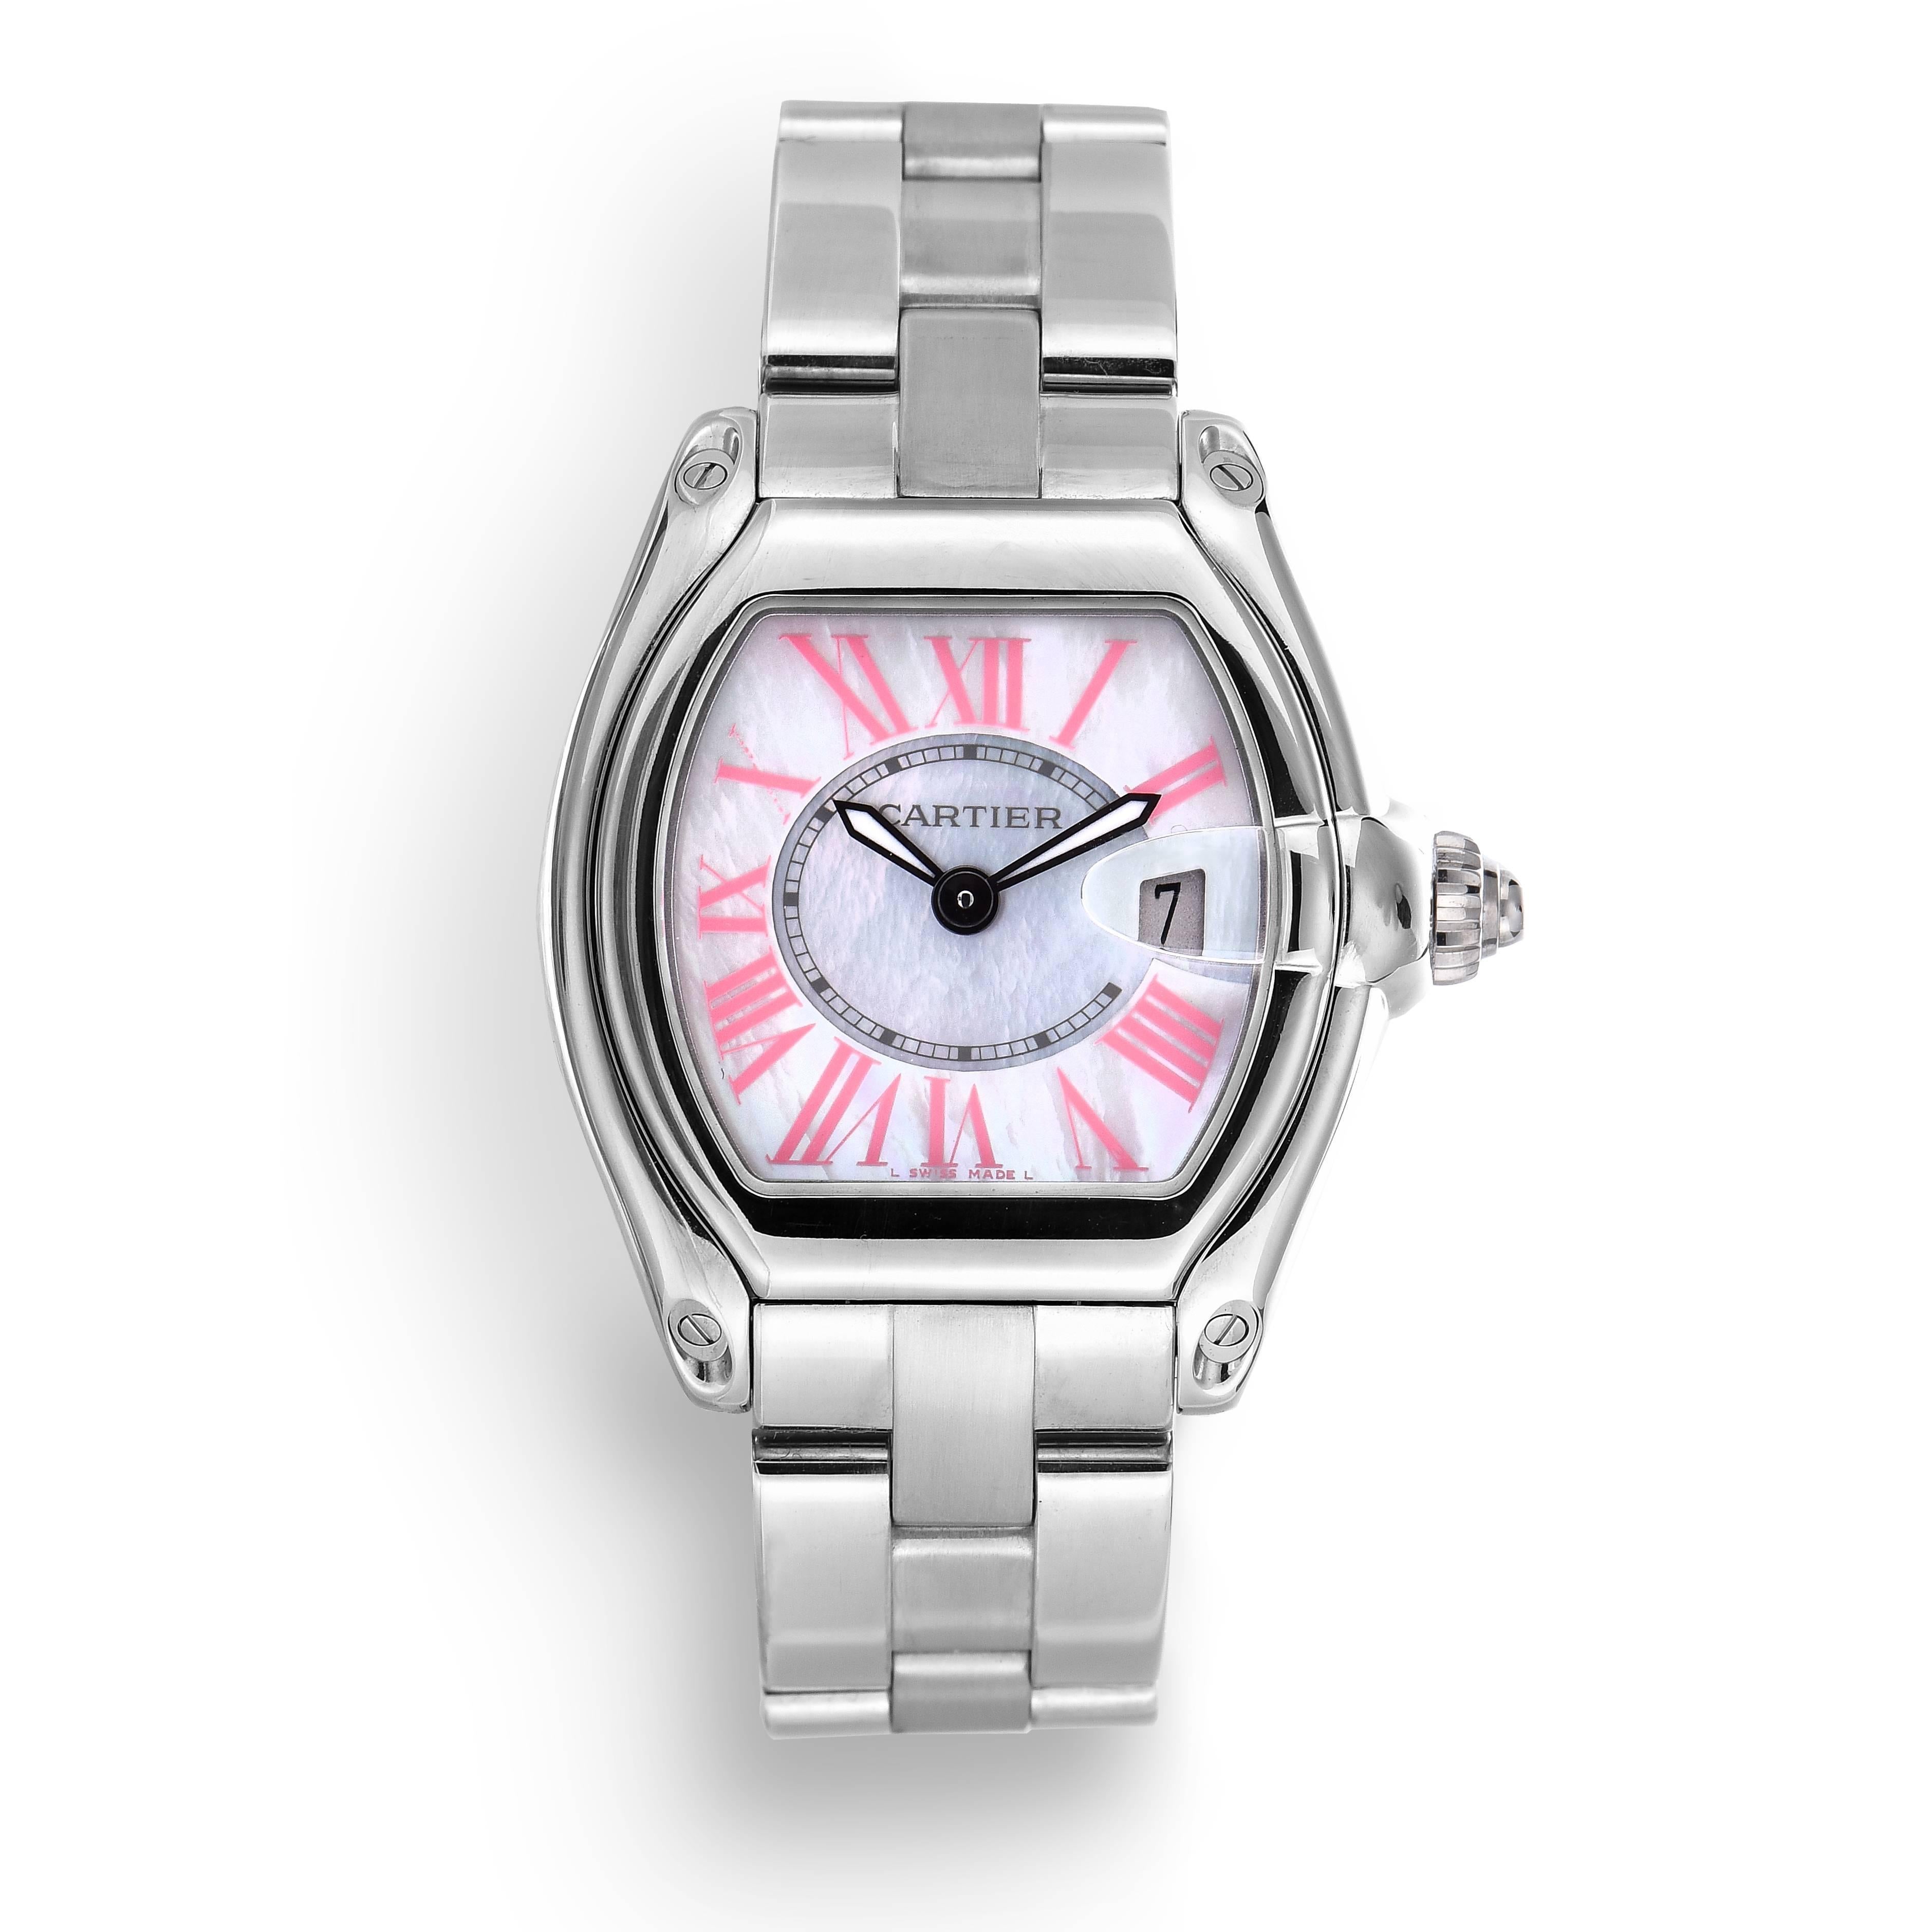 Cartier Ladies Stainless Steel Roadster Watch
Rare Pink Mother of Pearl Dial
Quartz Movement
Tonneau Shape Approximately 33mm
Cartier Screw Down Cabochon Crown
Sapphire Crystal
Stainless Steel Case
Mother of Pearl Dial with Pink Roman